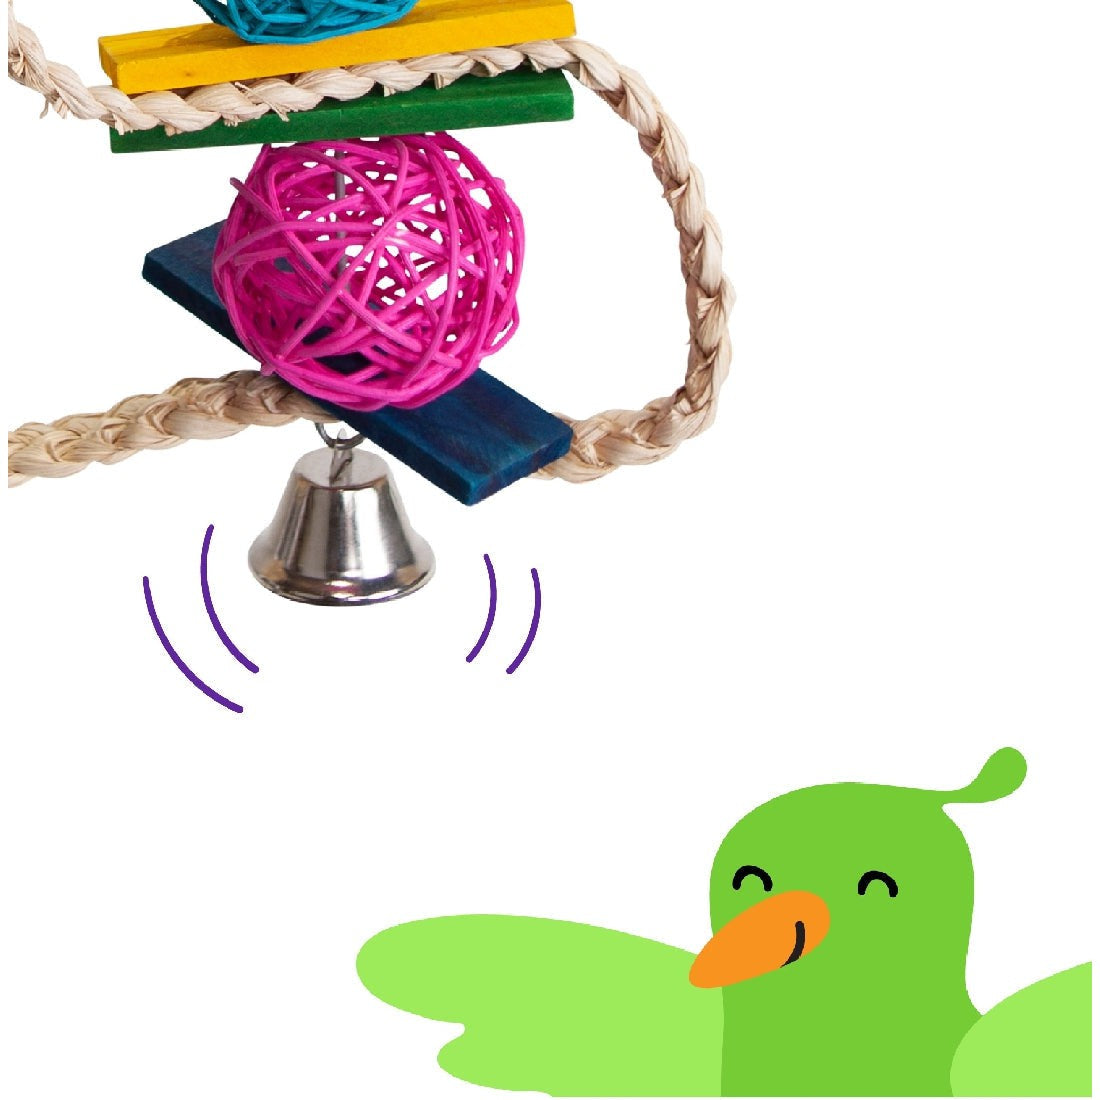 Colorful bird toy with ropes, wooden blocks, bell, and cartoon bird.